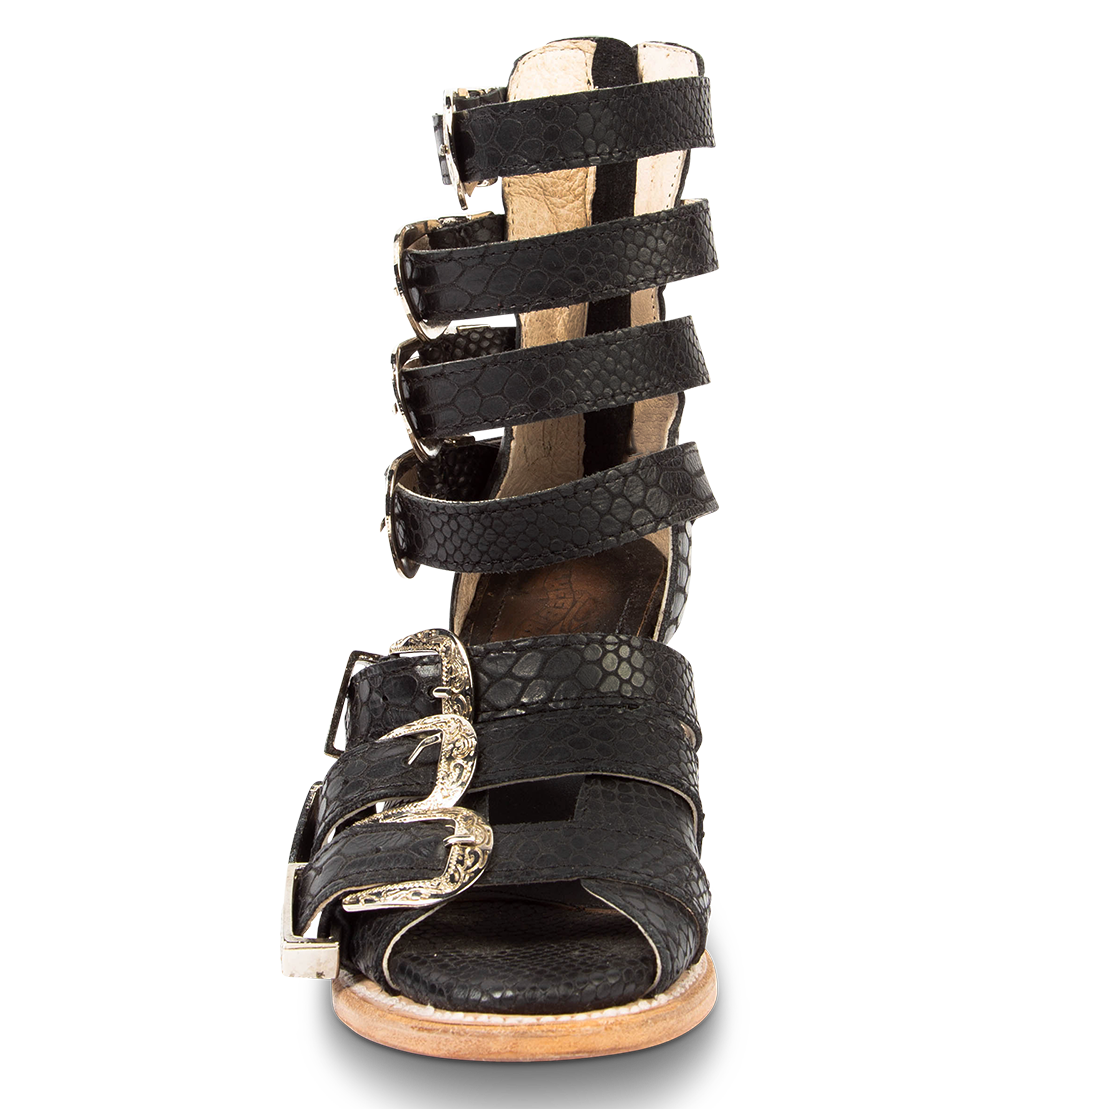 Front view showing embossed leather straps and metal buckles on FREEBIRD women's Brooklynn black snake sandal